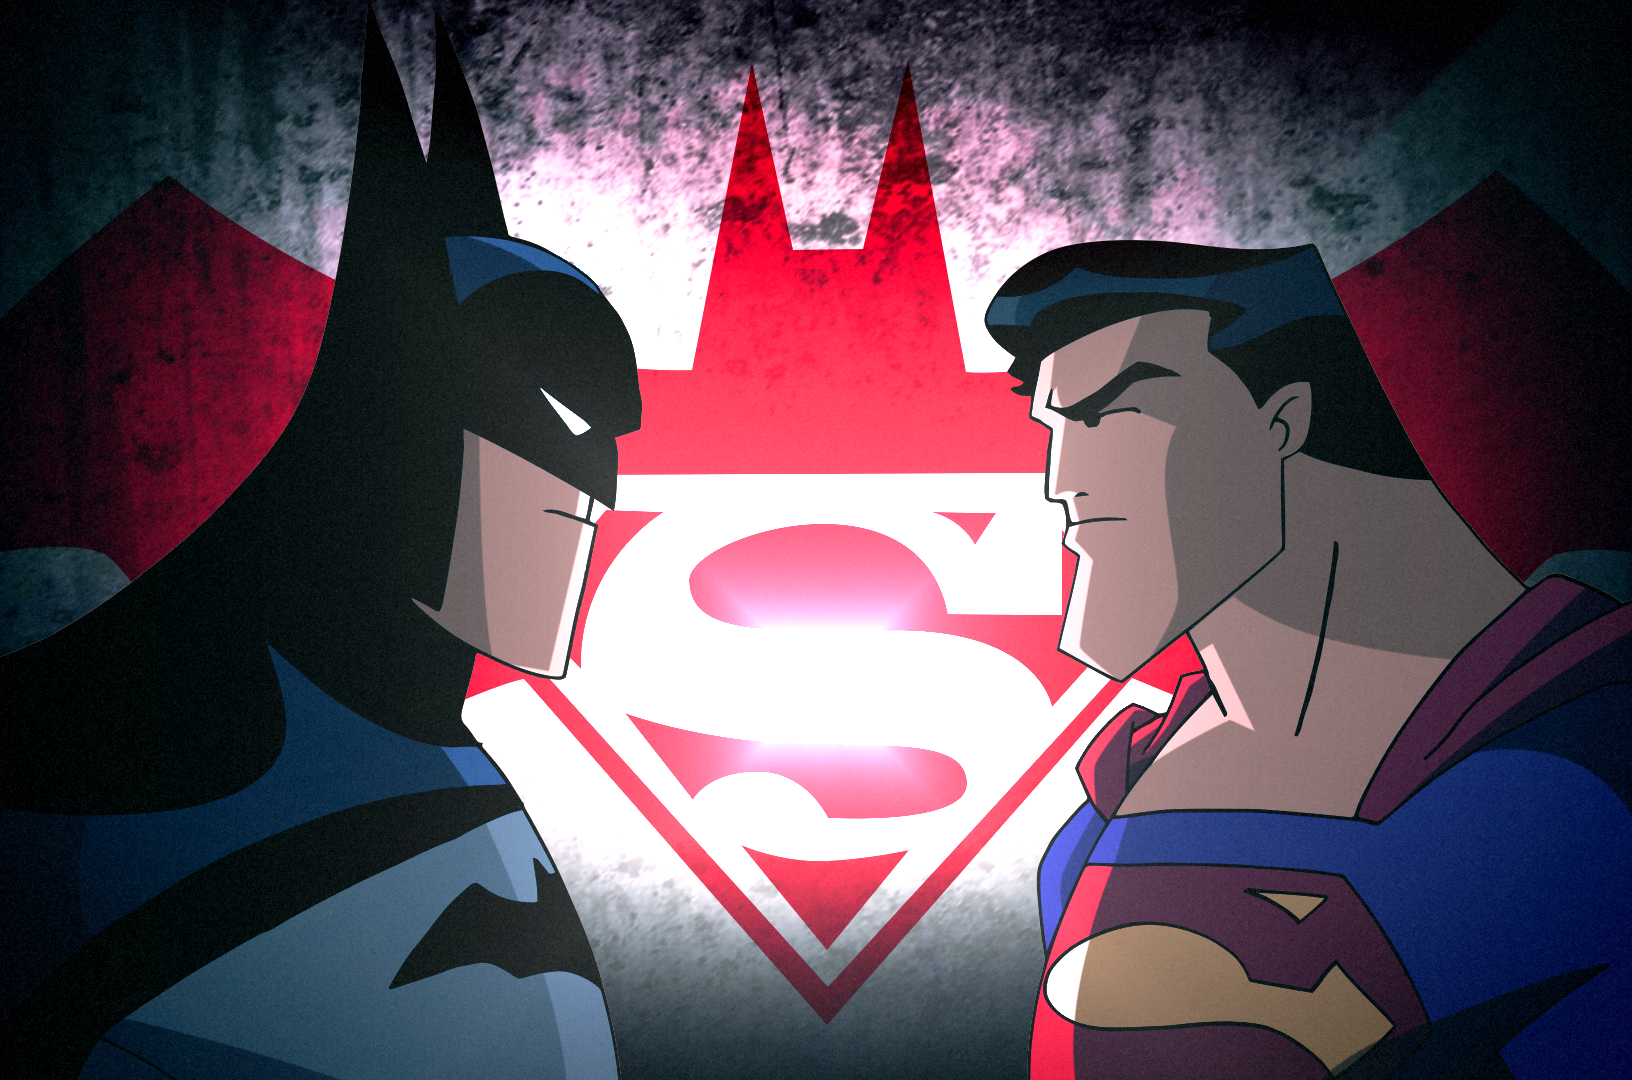 Batman v Superman: Dawn of Justice Picture by jtsentertainment - Image Abyss